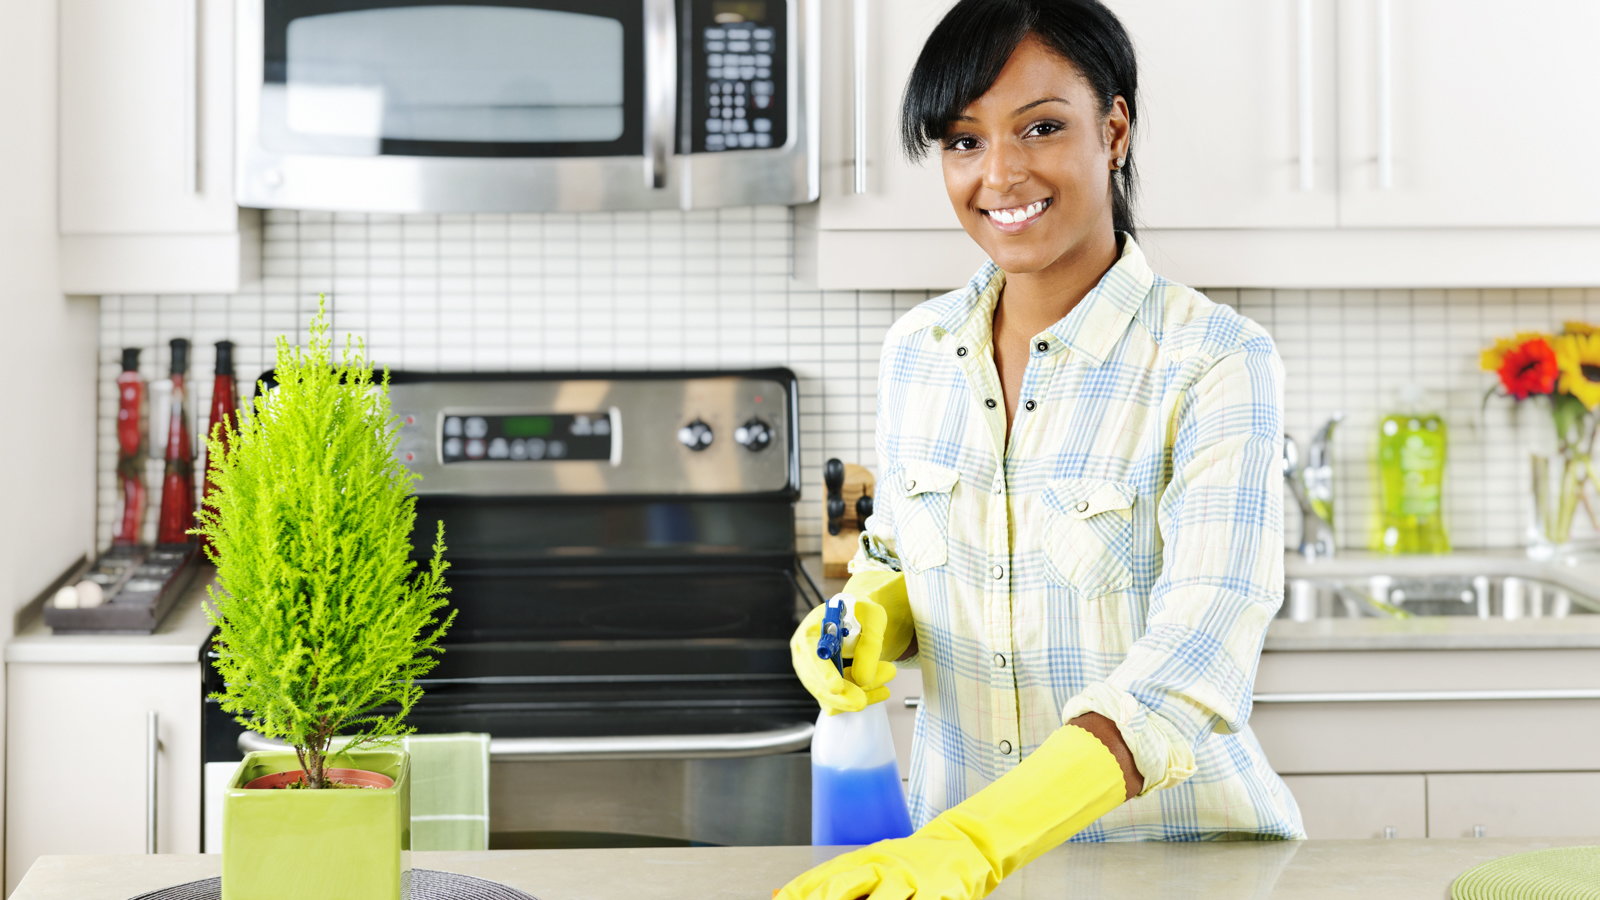 woman cleaning countertop